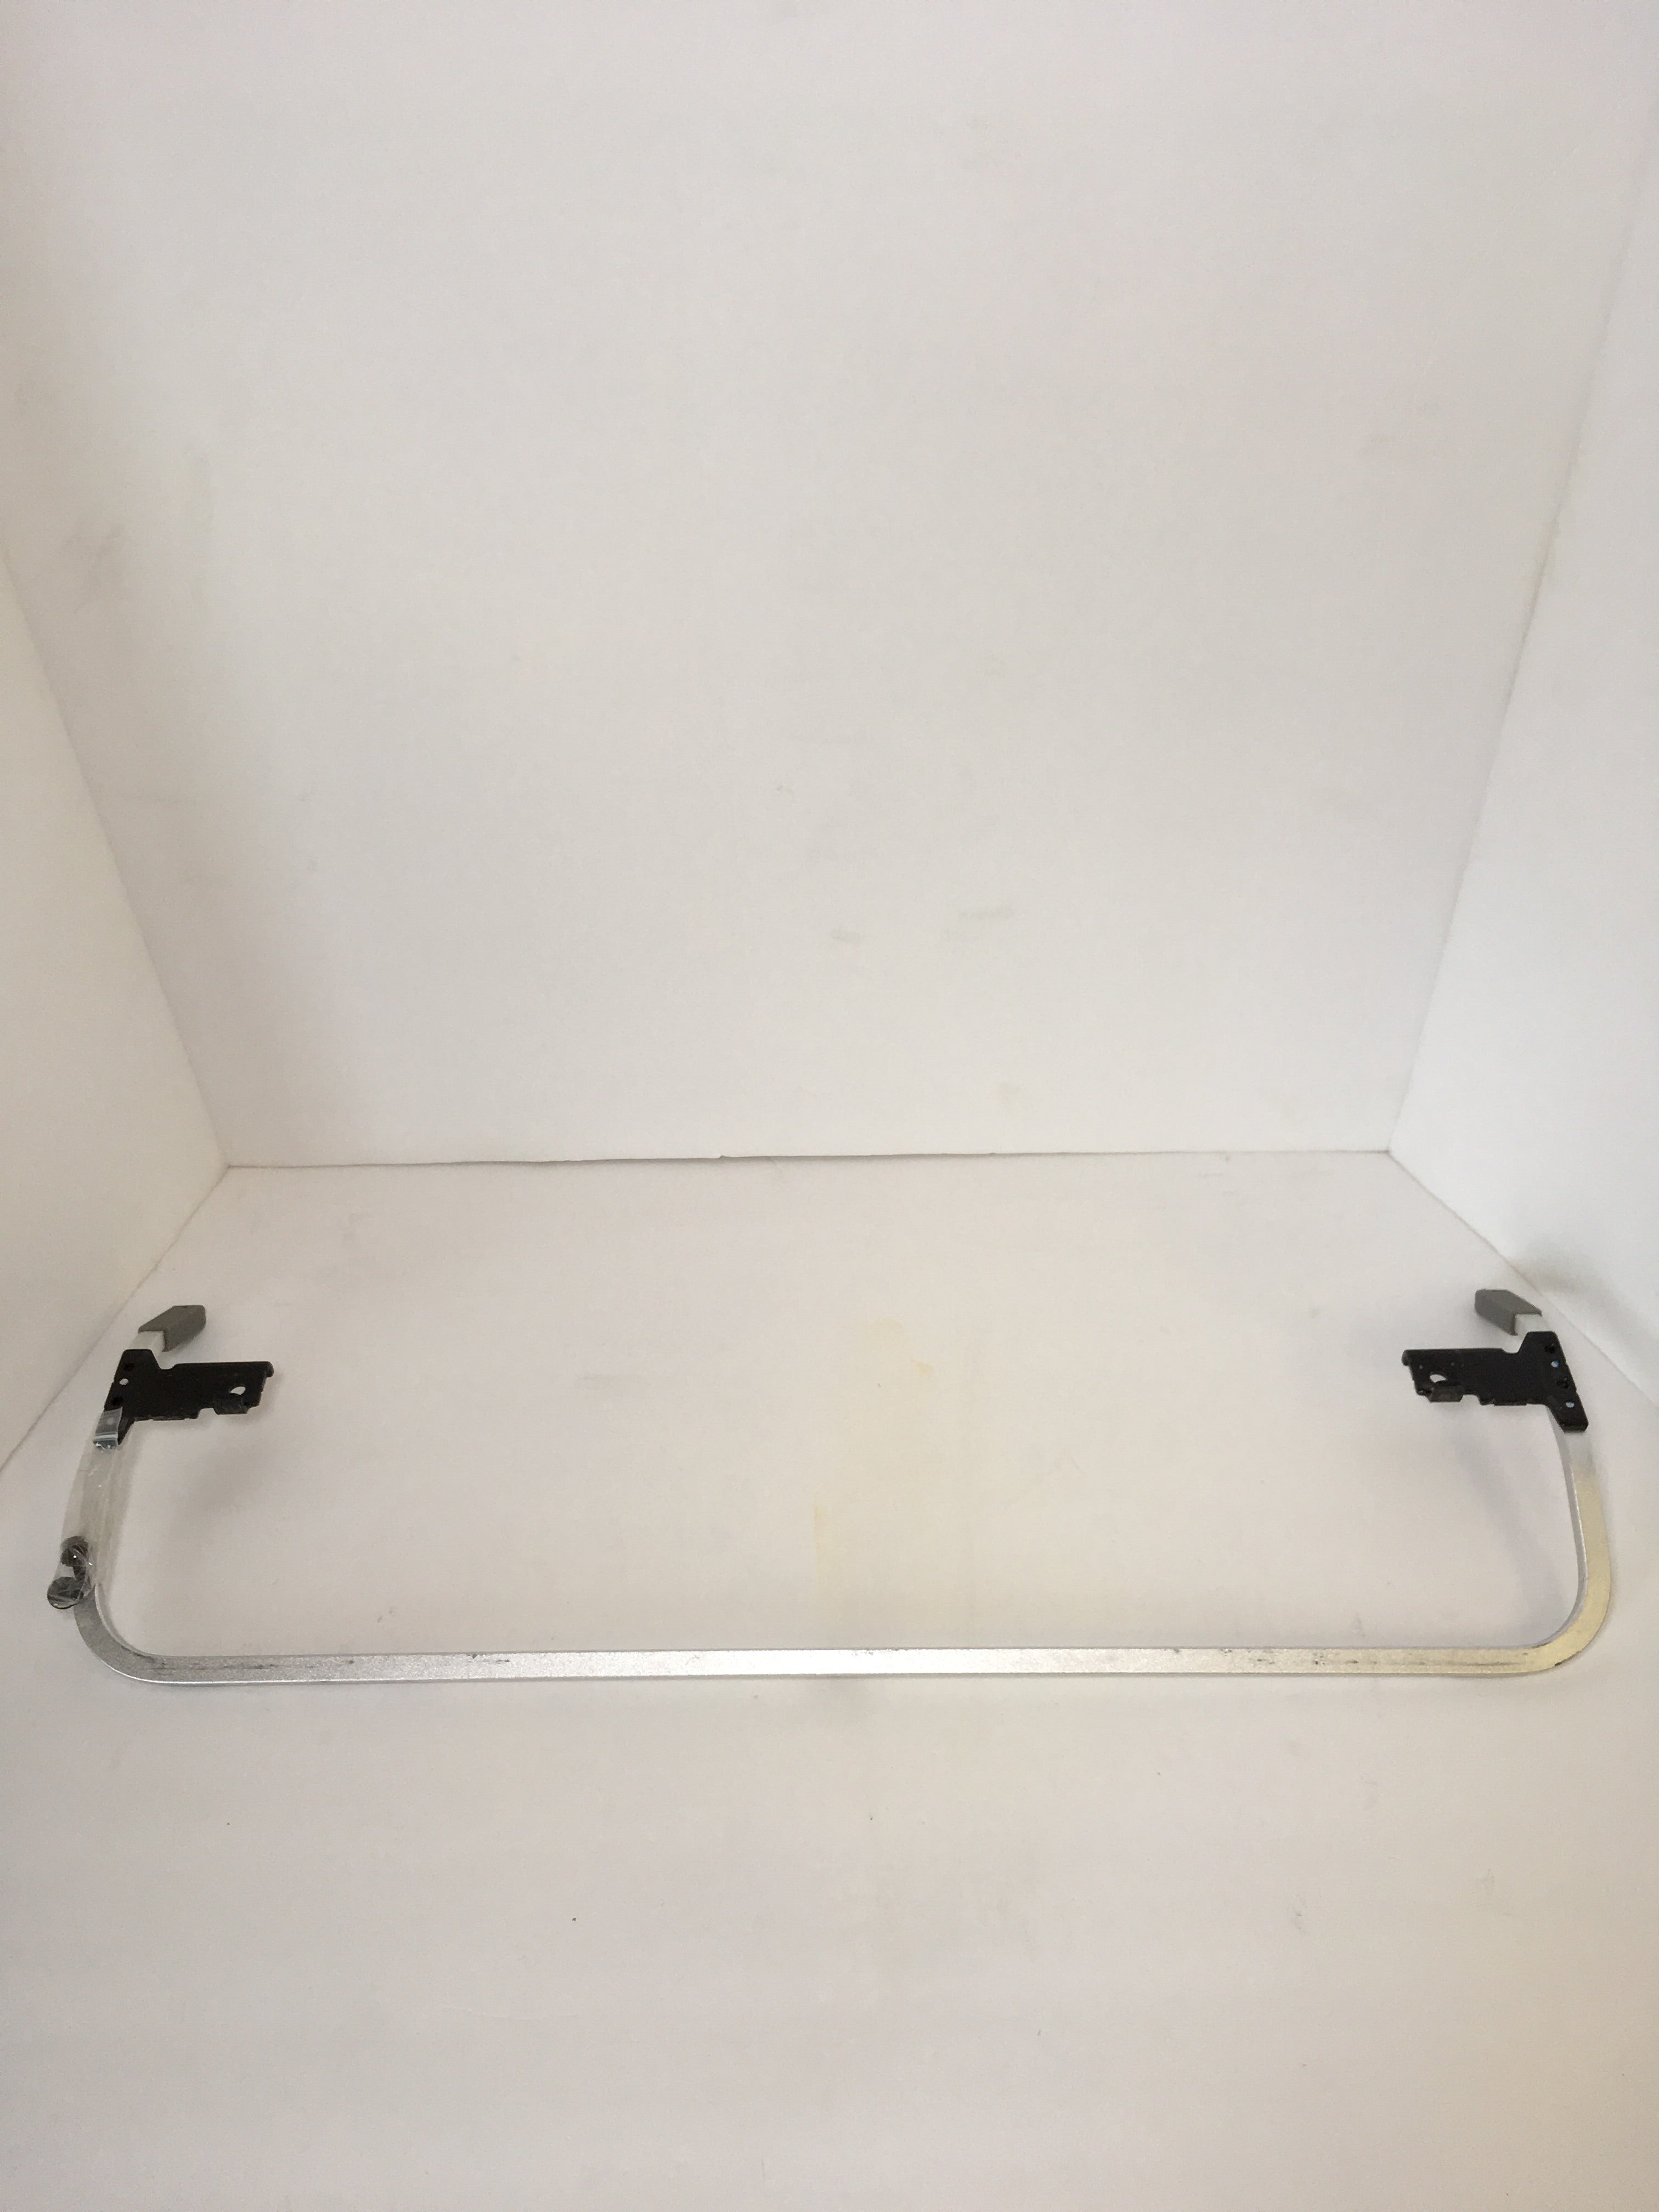 Sony 4-484-943-01 TV Stand/Base